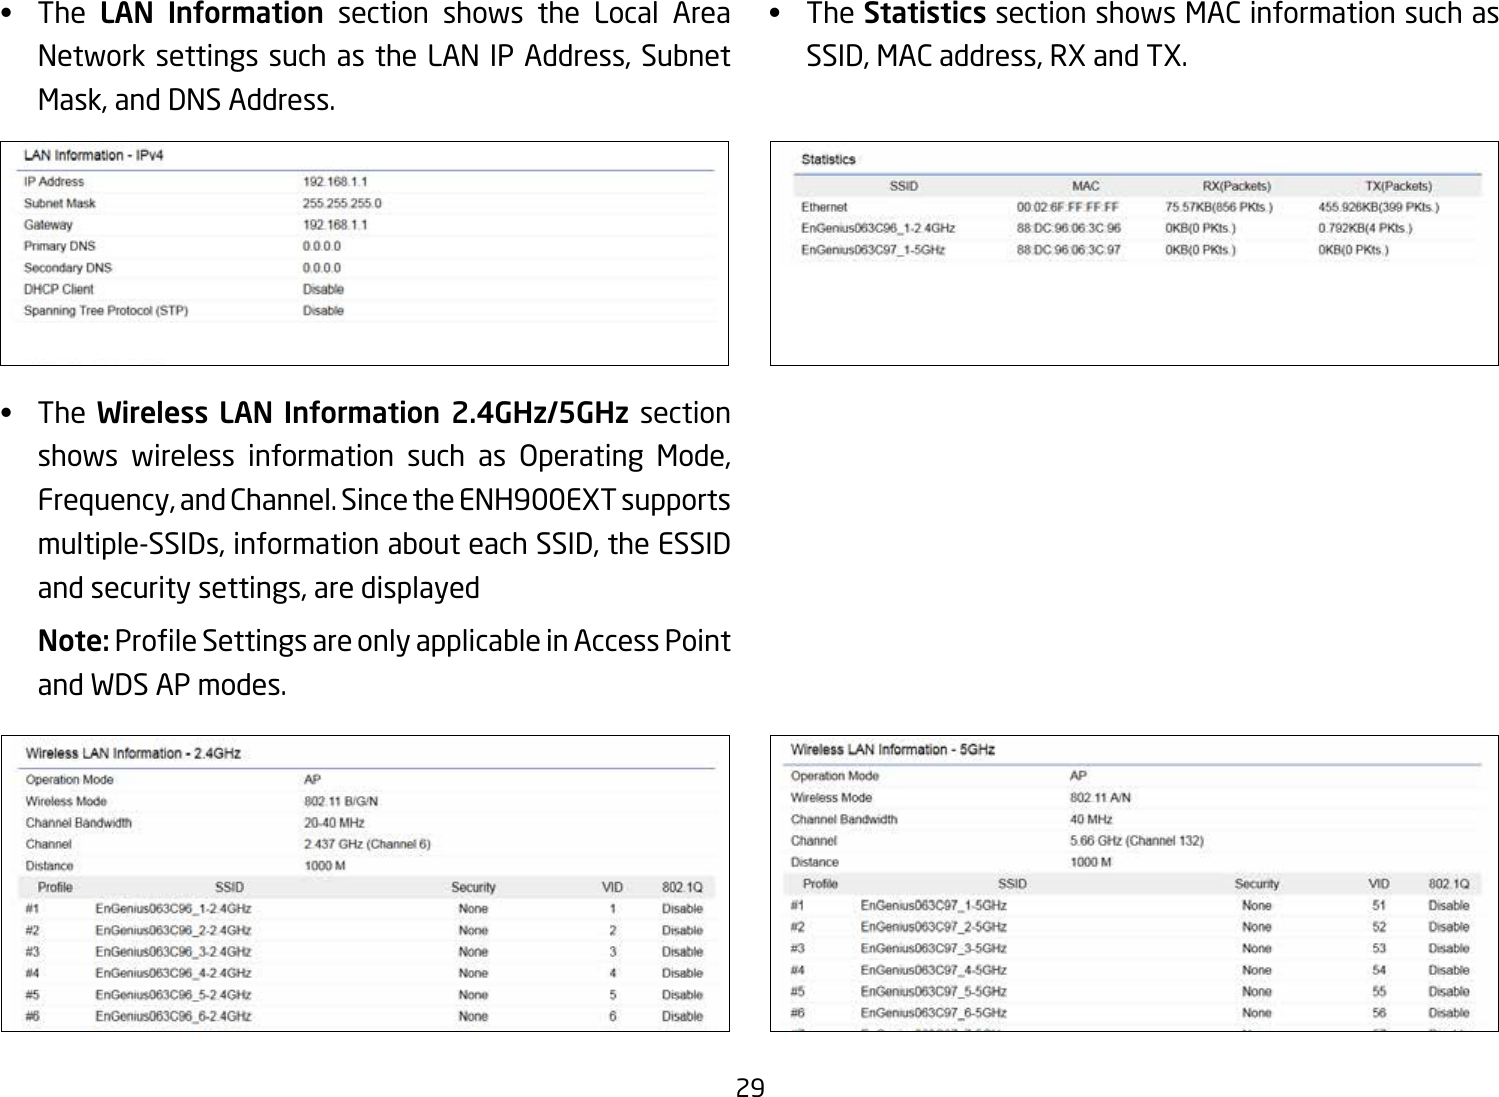 29•  The  LAN  Information section shows the Local Area Network settings such as the LAN IP Address, Subnet Mask, and DNS Address.•  The Wireless  LAN  Information  2.4GHz/5GHz section shows wireless information such as Operating Mode,Frequency, and Channel. Since the ENH900EXT supports multiple-SSIDs, information about each SSID, the ESSID and security settings, are displayed Note: ProleSettingsareonlyapplicableinAccessPointand WDS AP modes.•  TheStatistics section shows MAC information such as SSID, MAC address, RX and TX.